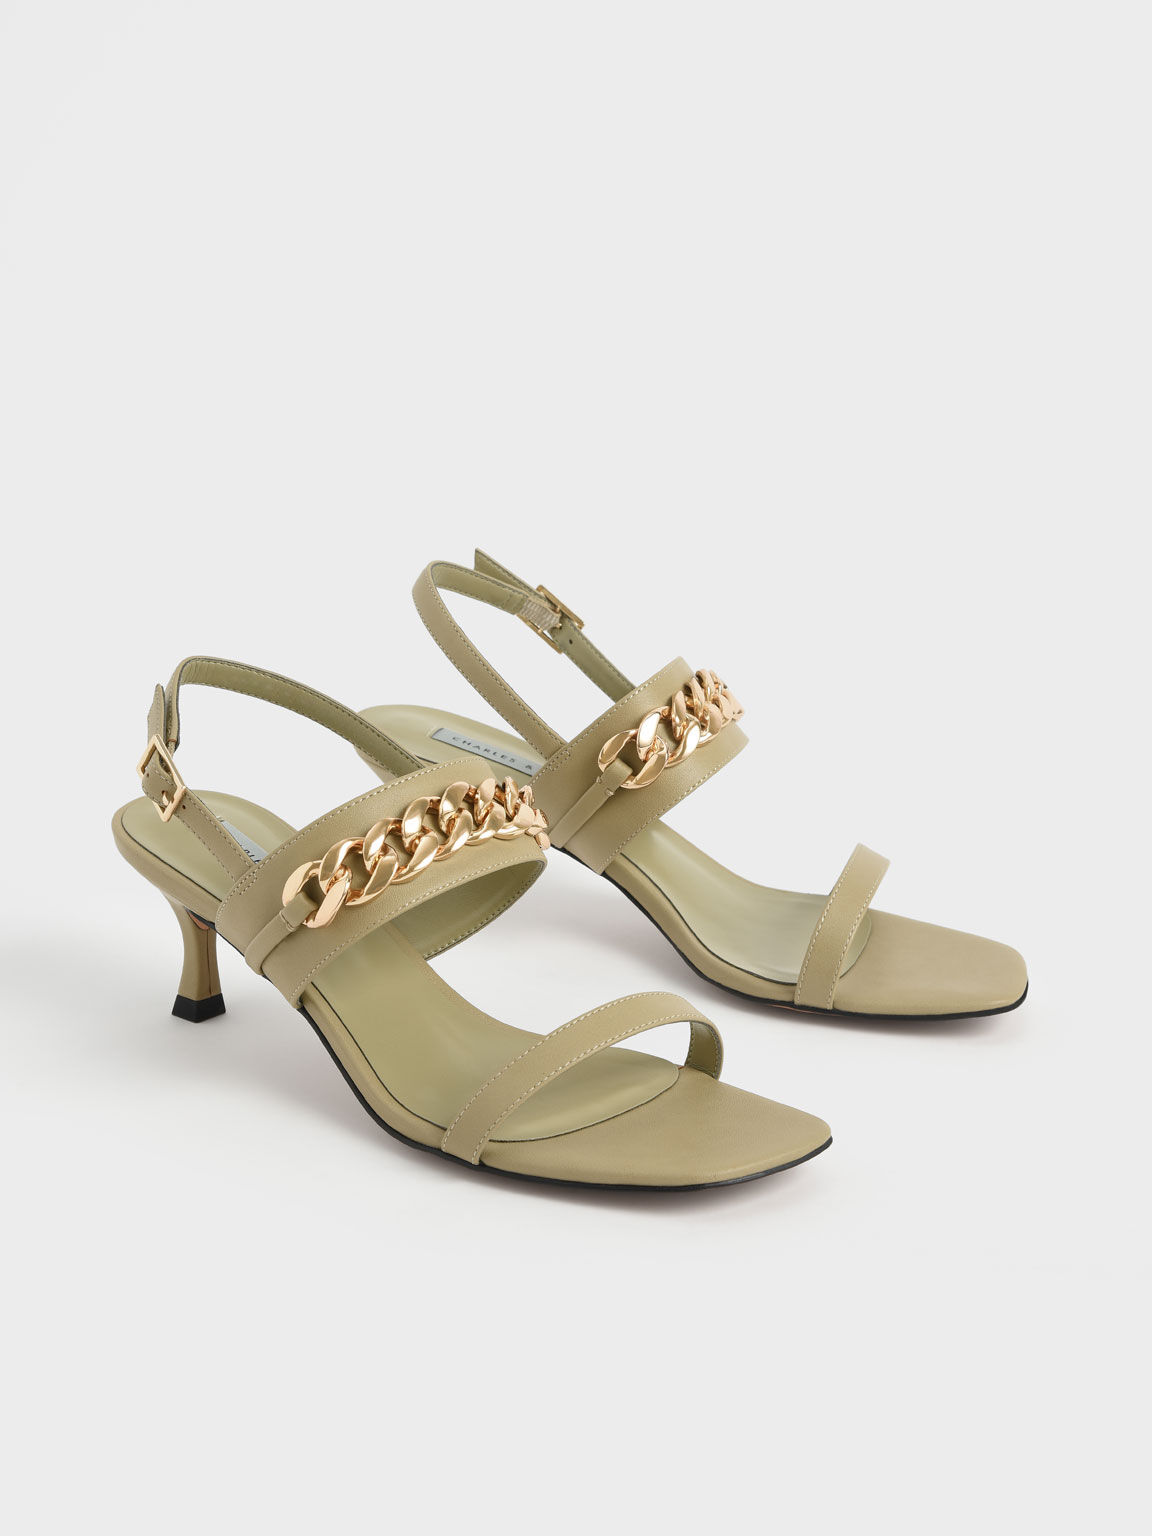 Chain Strap Heeled Sandals, Taupe, hi-res